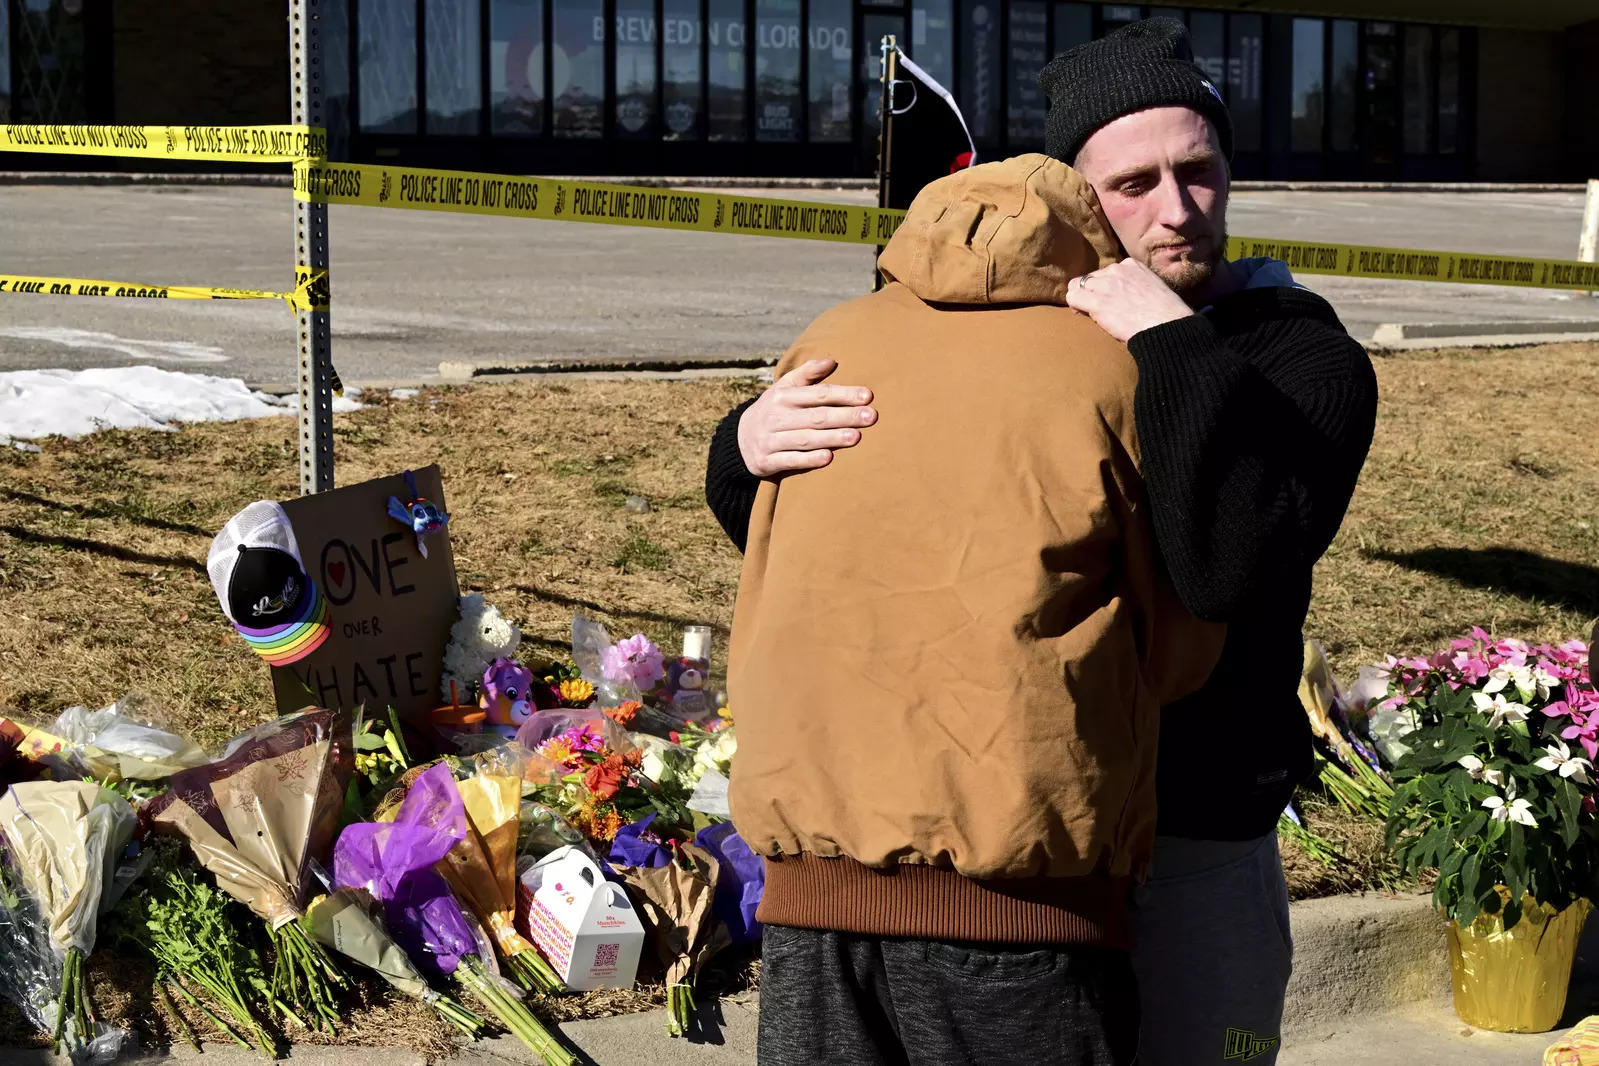 A man comforts another at a makeshift memorial near Club Q, Sunday in Colorado Springs. (File photo: AP)